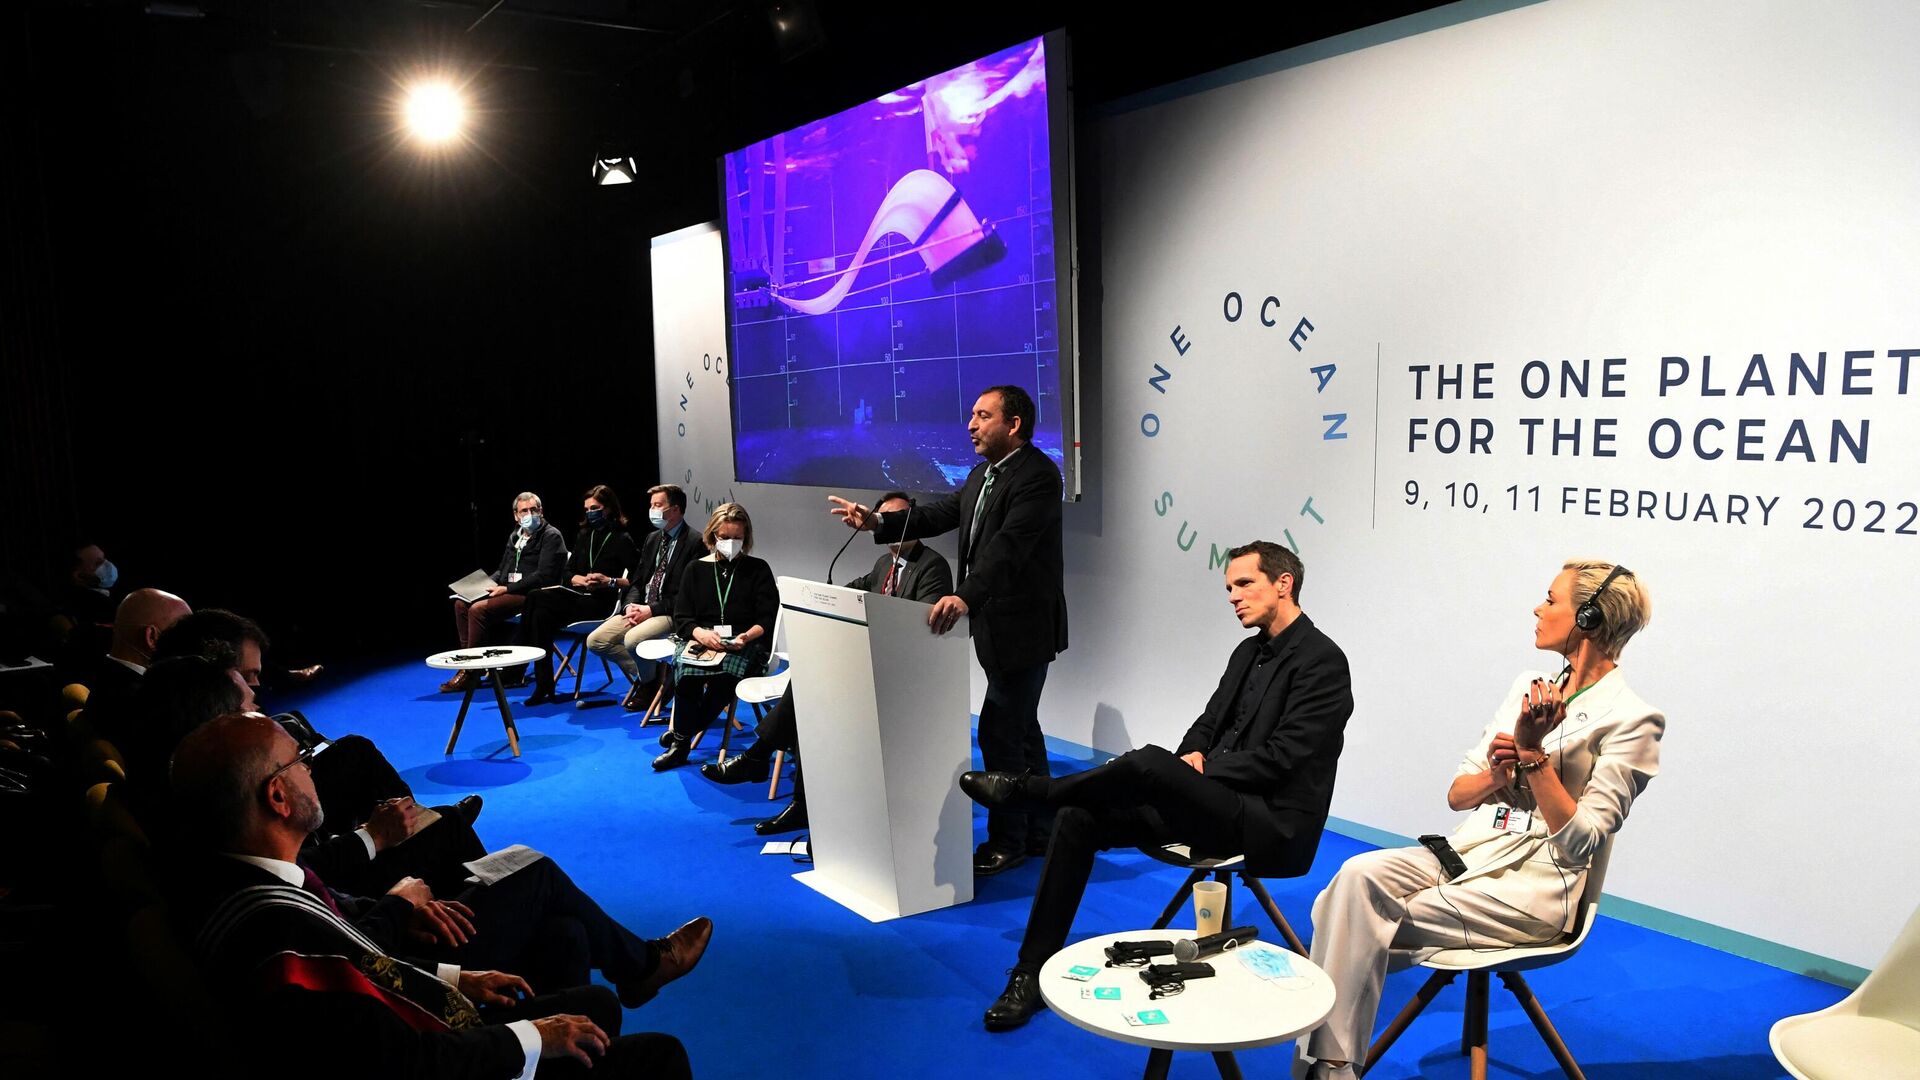 People take part in a symposium as part of the One Ocean Summit in Brest, western France, on February 10, 2022 - Sputnik International, 1920, 11.02.2022